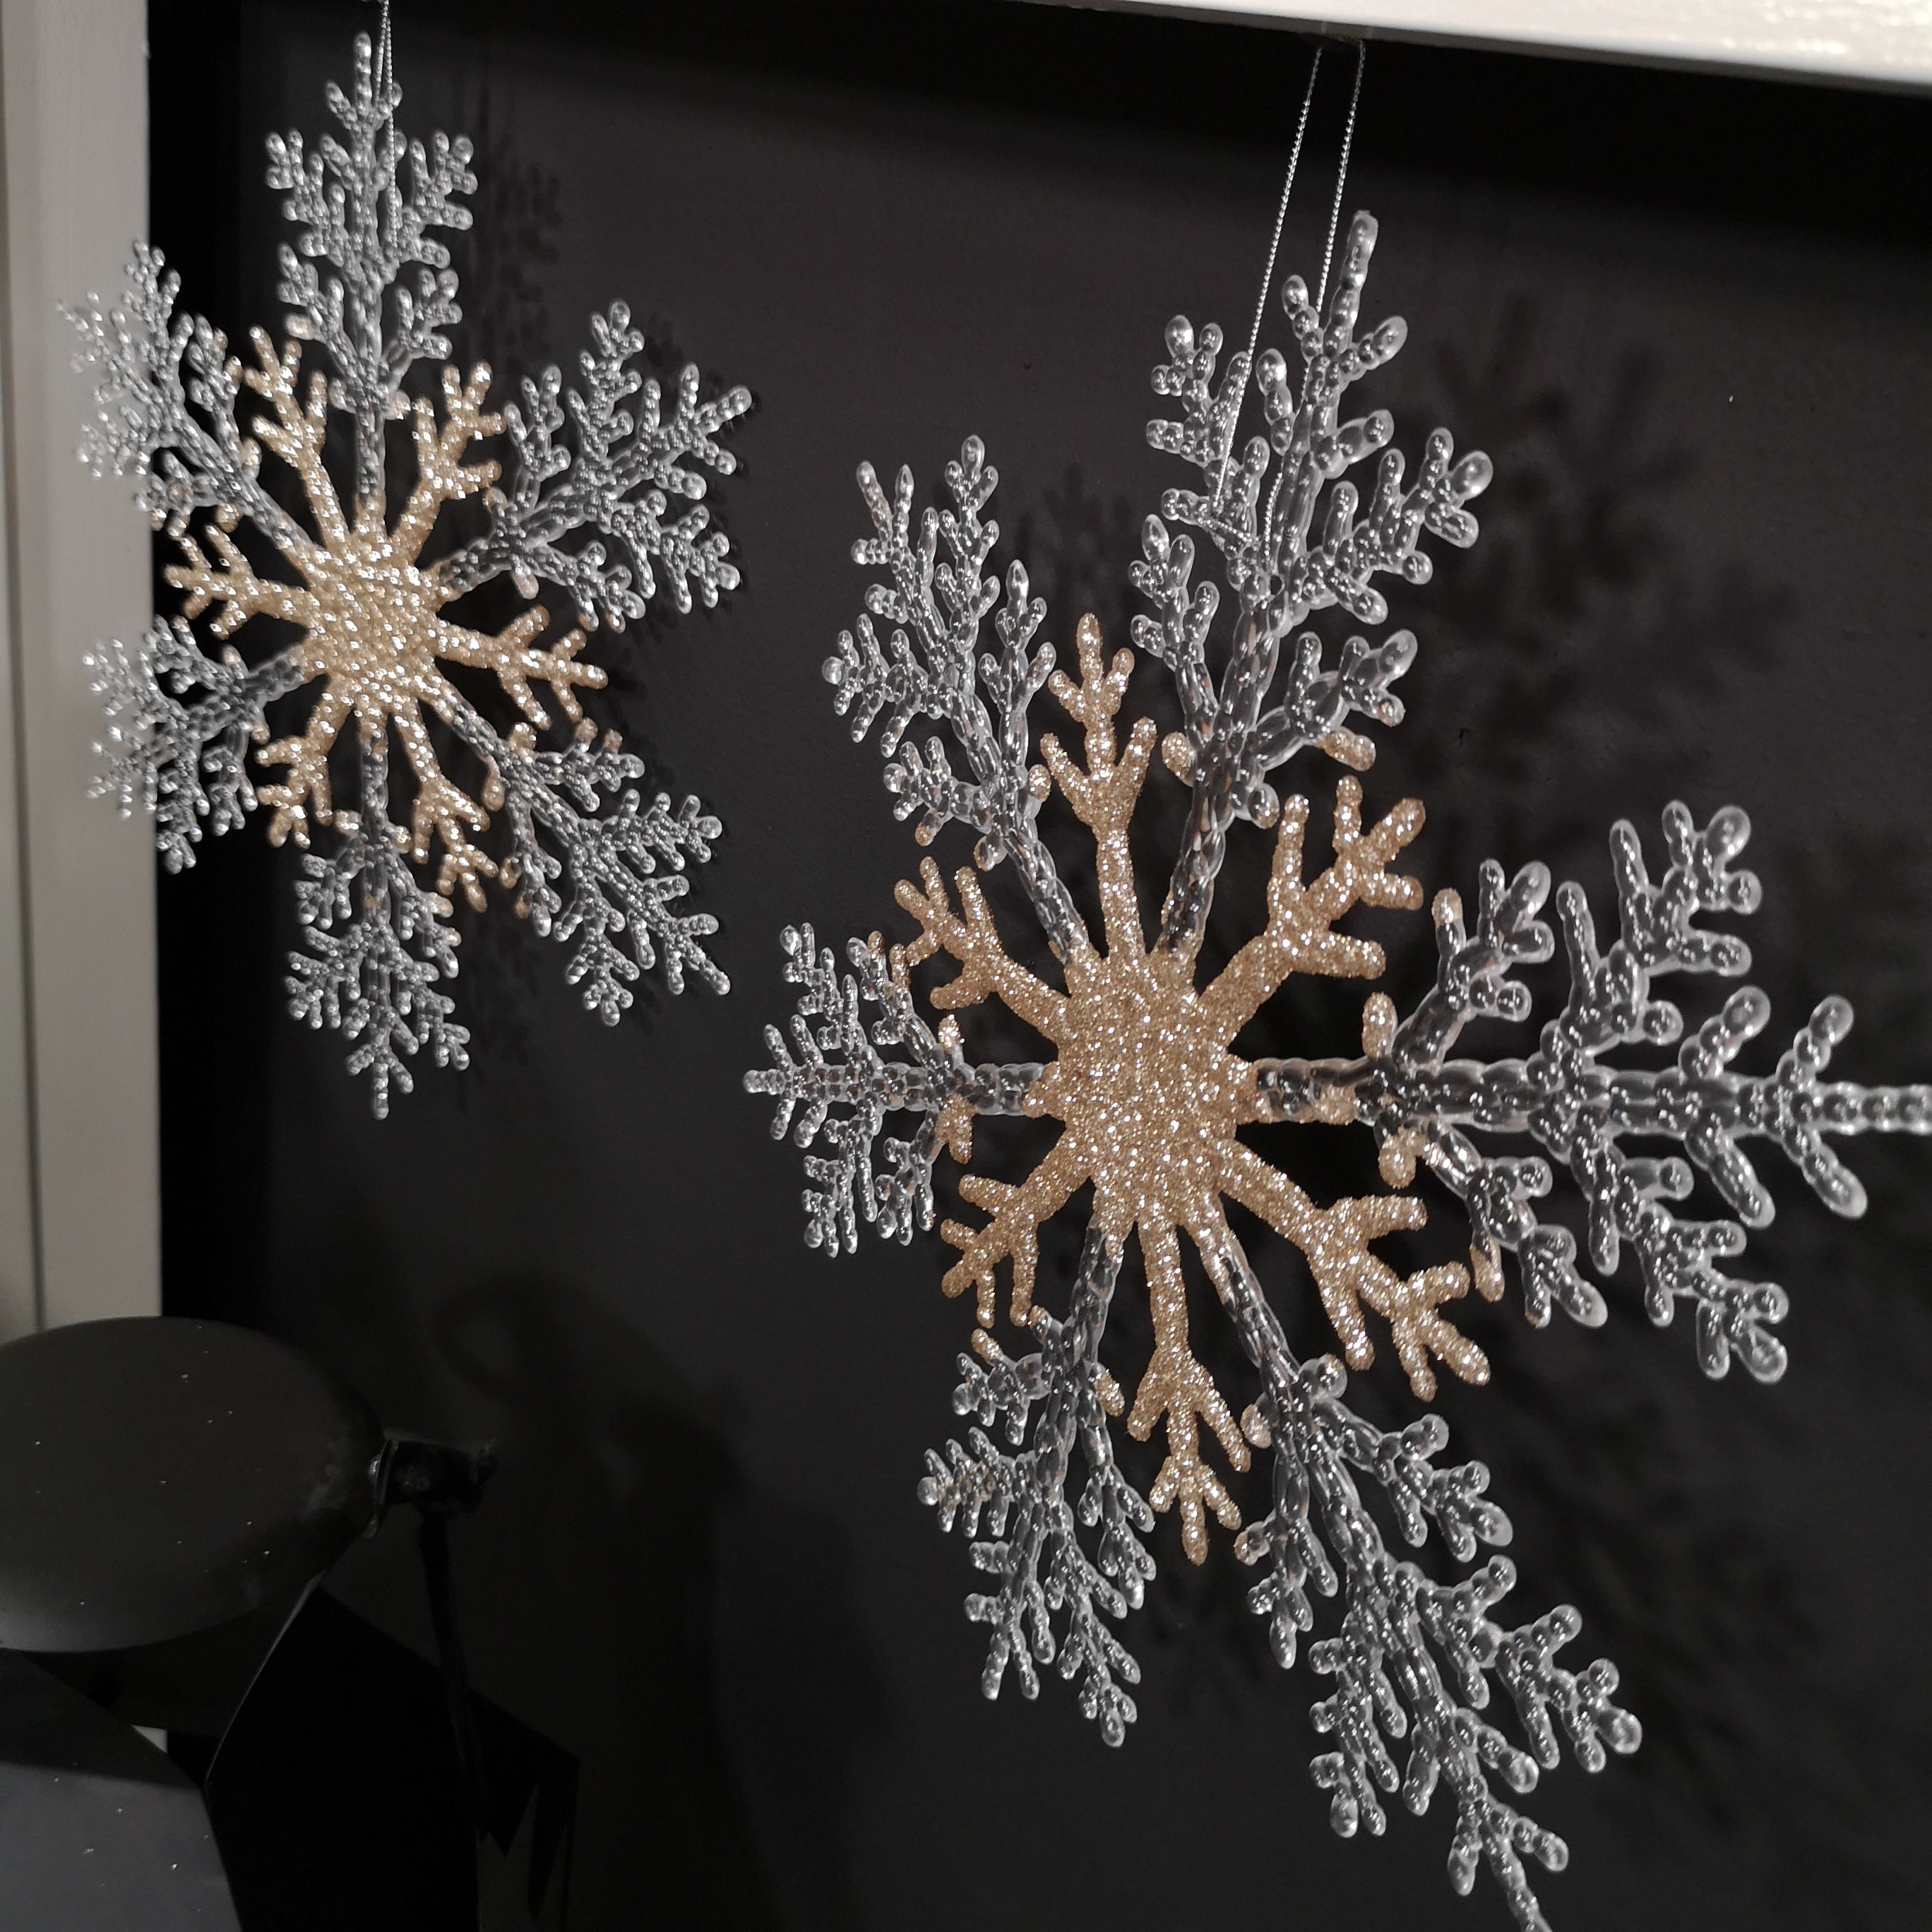 31cm Acrylic Glitter Hanging Snowflake Christmas Decoration in Champagne Gold